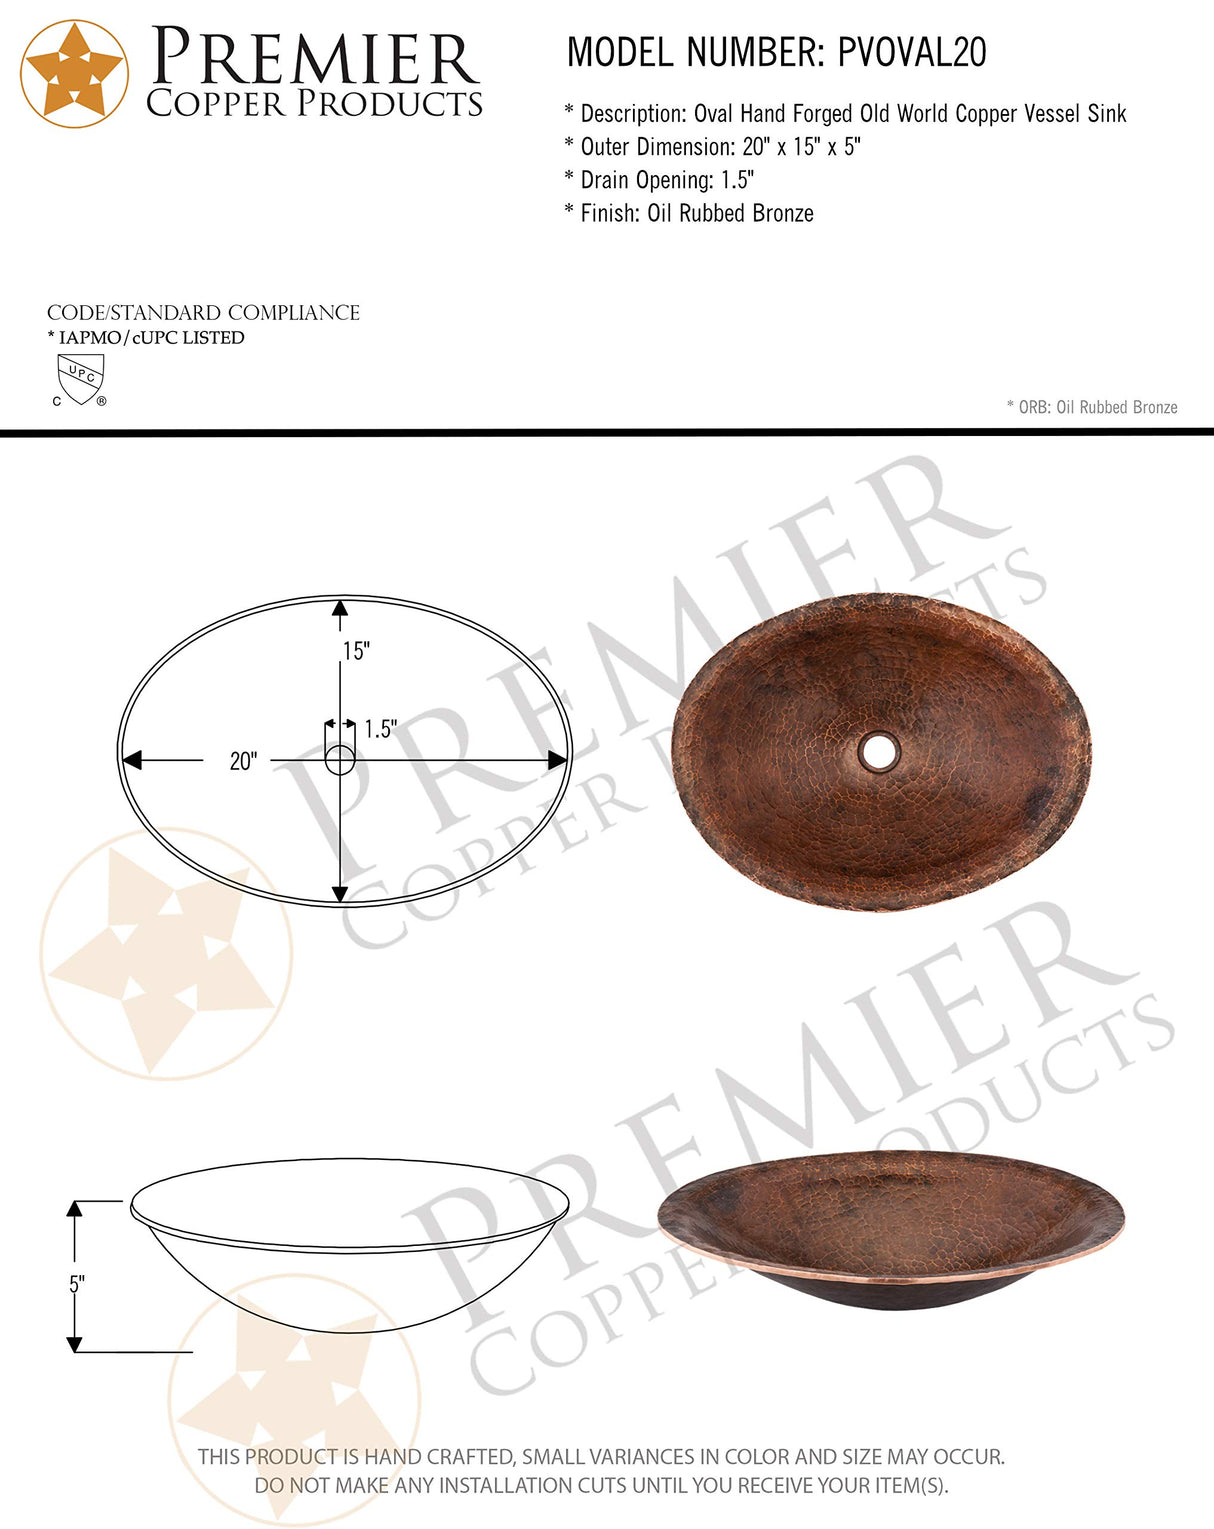 Premier Copper Products PVOVAL20 20-Inch Oval Hand Forged Old World Copper Vessel Sink, Oil Rubbed Bronze